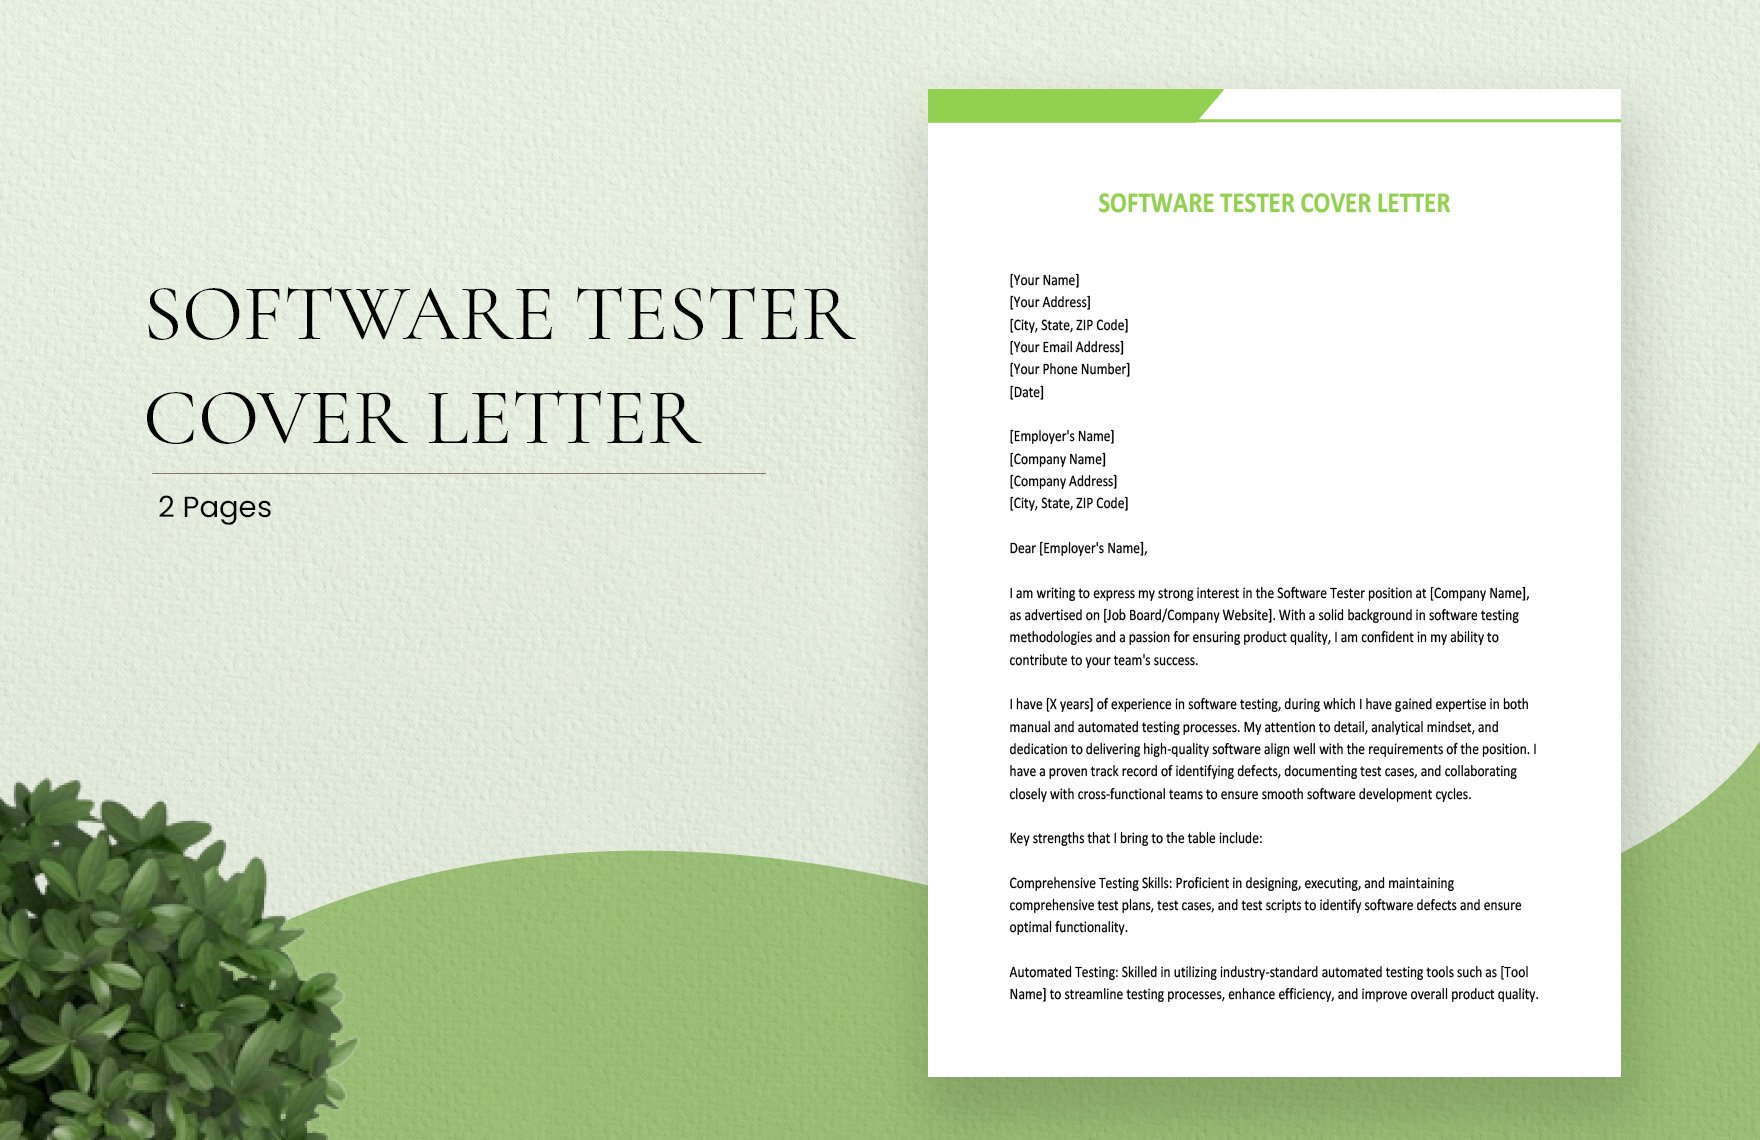 Free Game Tester Cover Letter - Download in Word, Google Docs, PDF